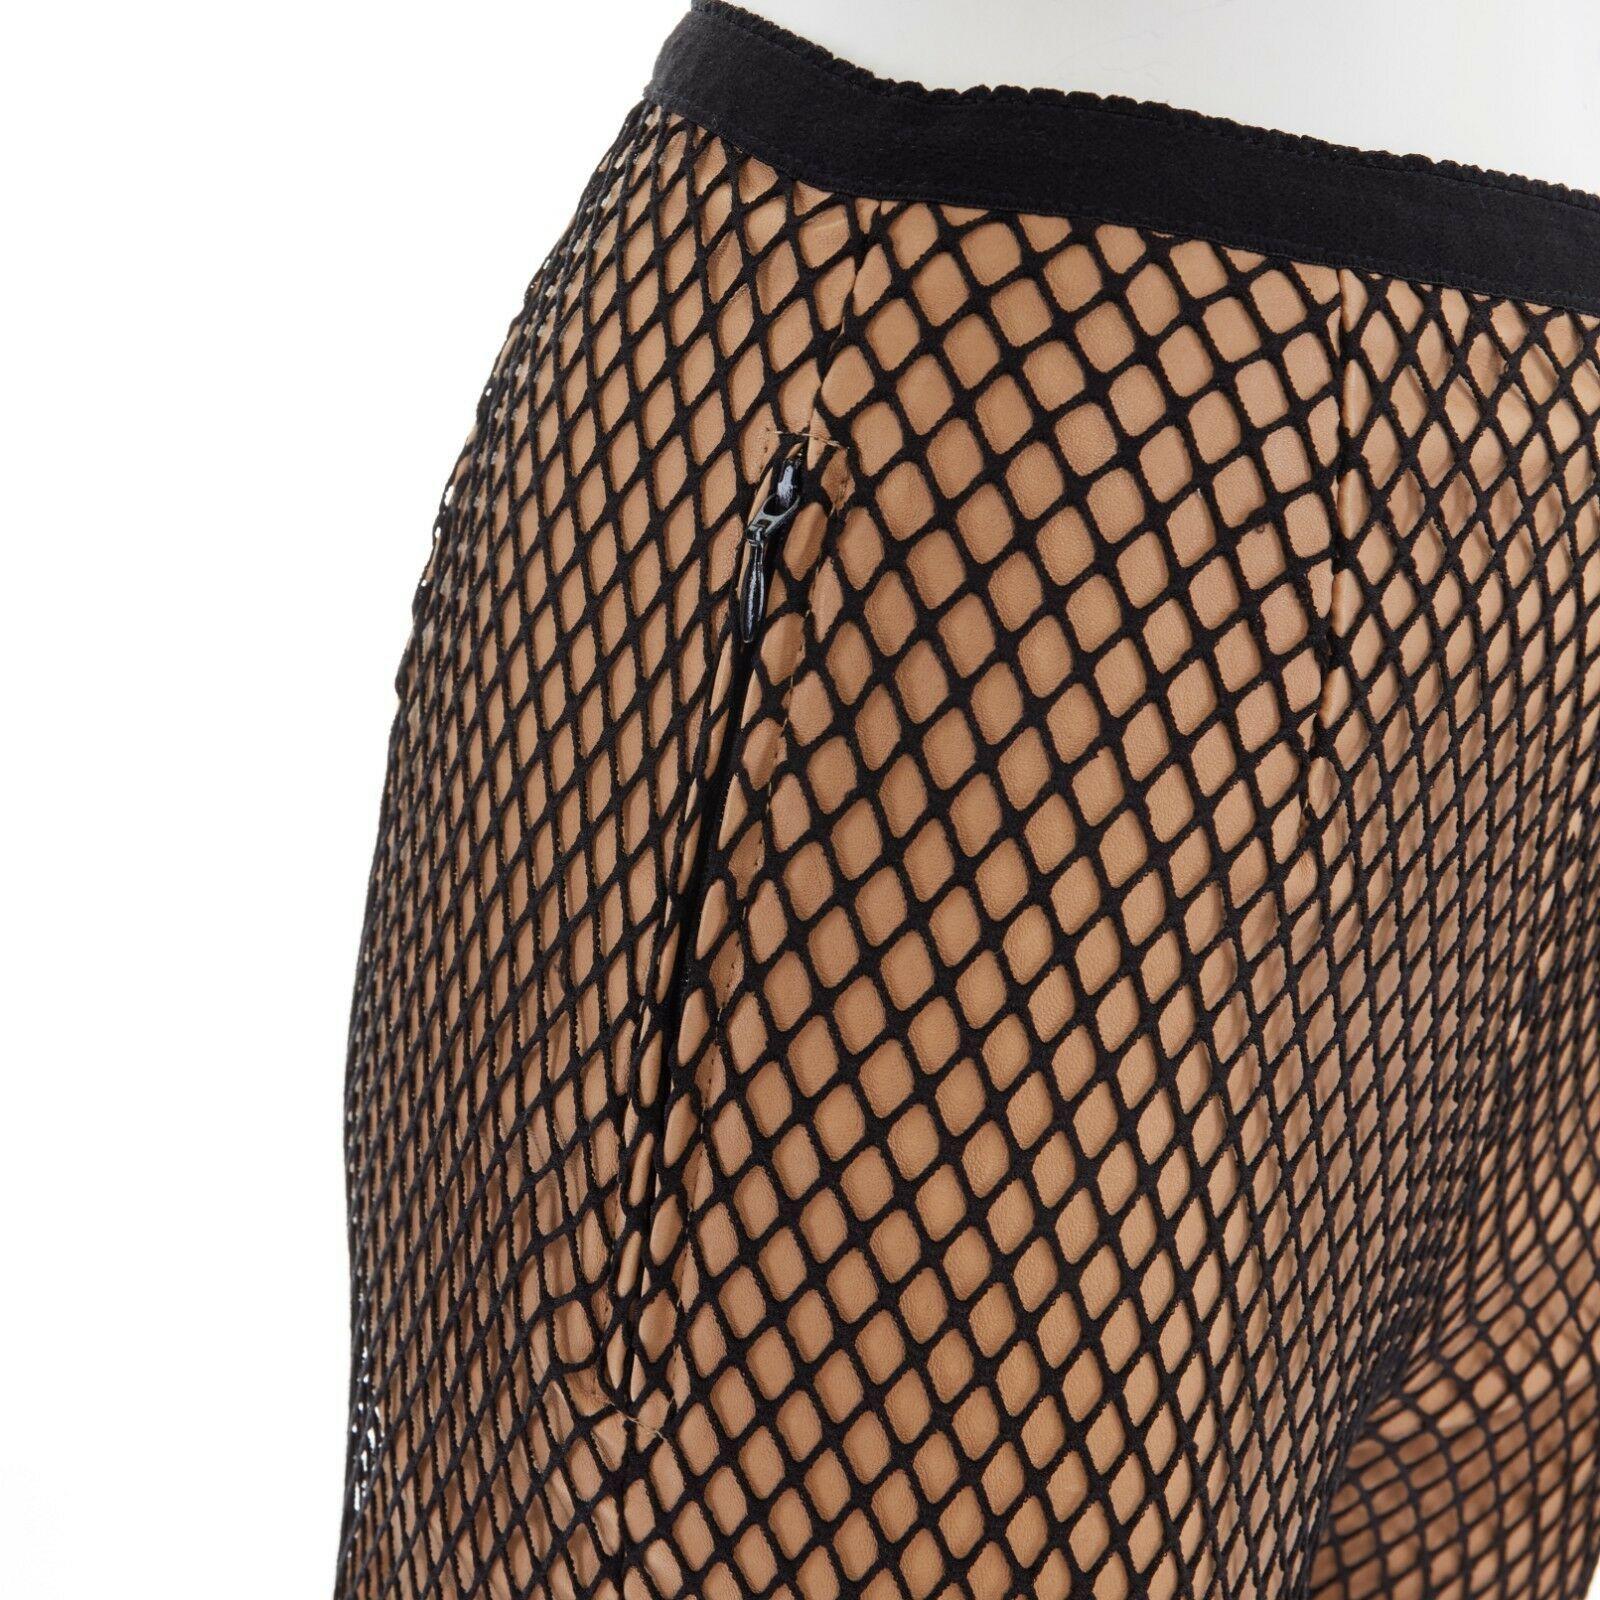 runway MAISON MARGIELA AW11 Tromp Loeil nude leather black fishnet legging pants
MAISON MARTIN MARGIELA
FROM THE FALL 2011 COLLECTION
Tromp Loeil collection. Nude leather leggings. Black fishnet overlay. 
Elasticated ribbed waistband. Concealed